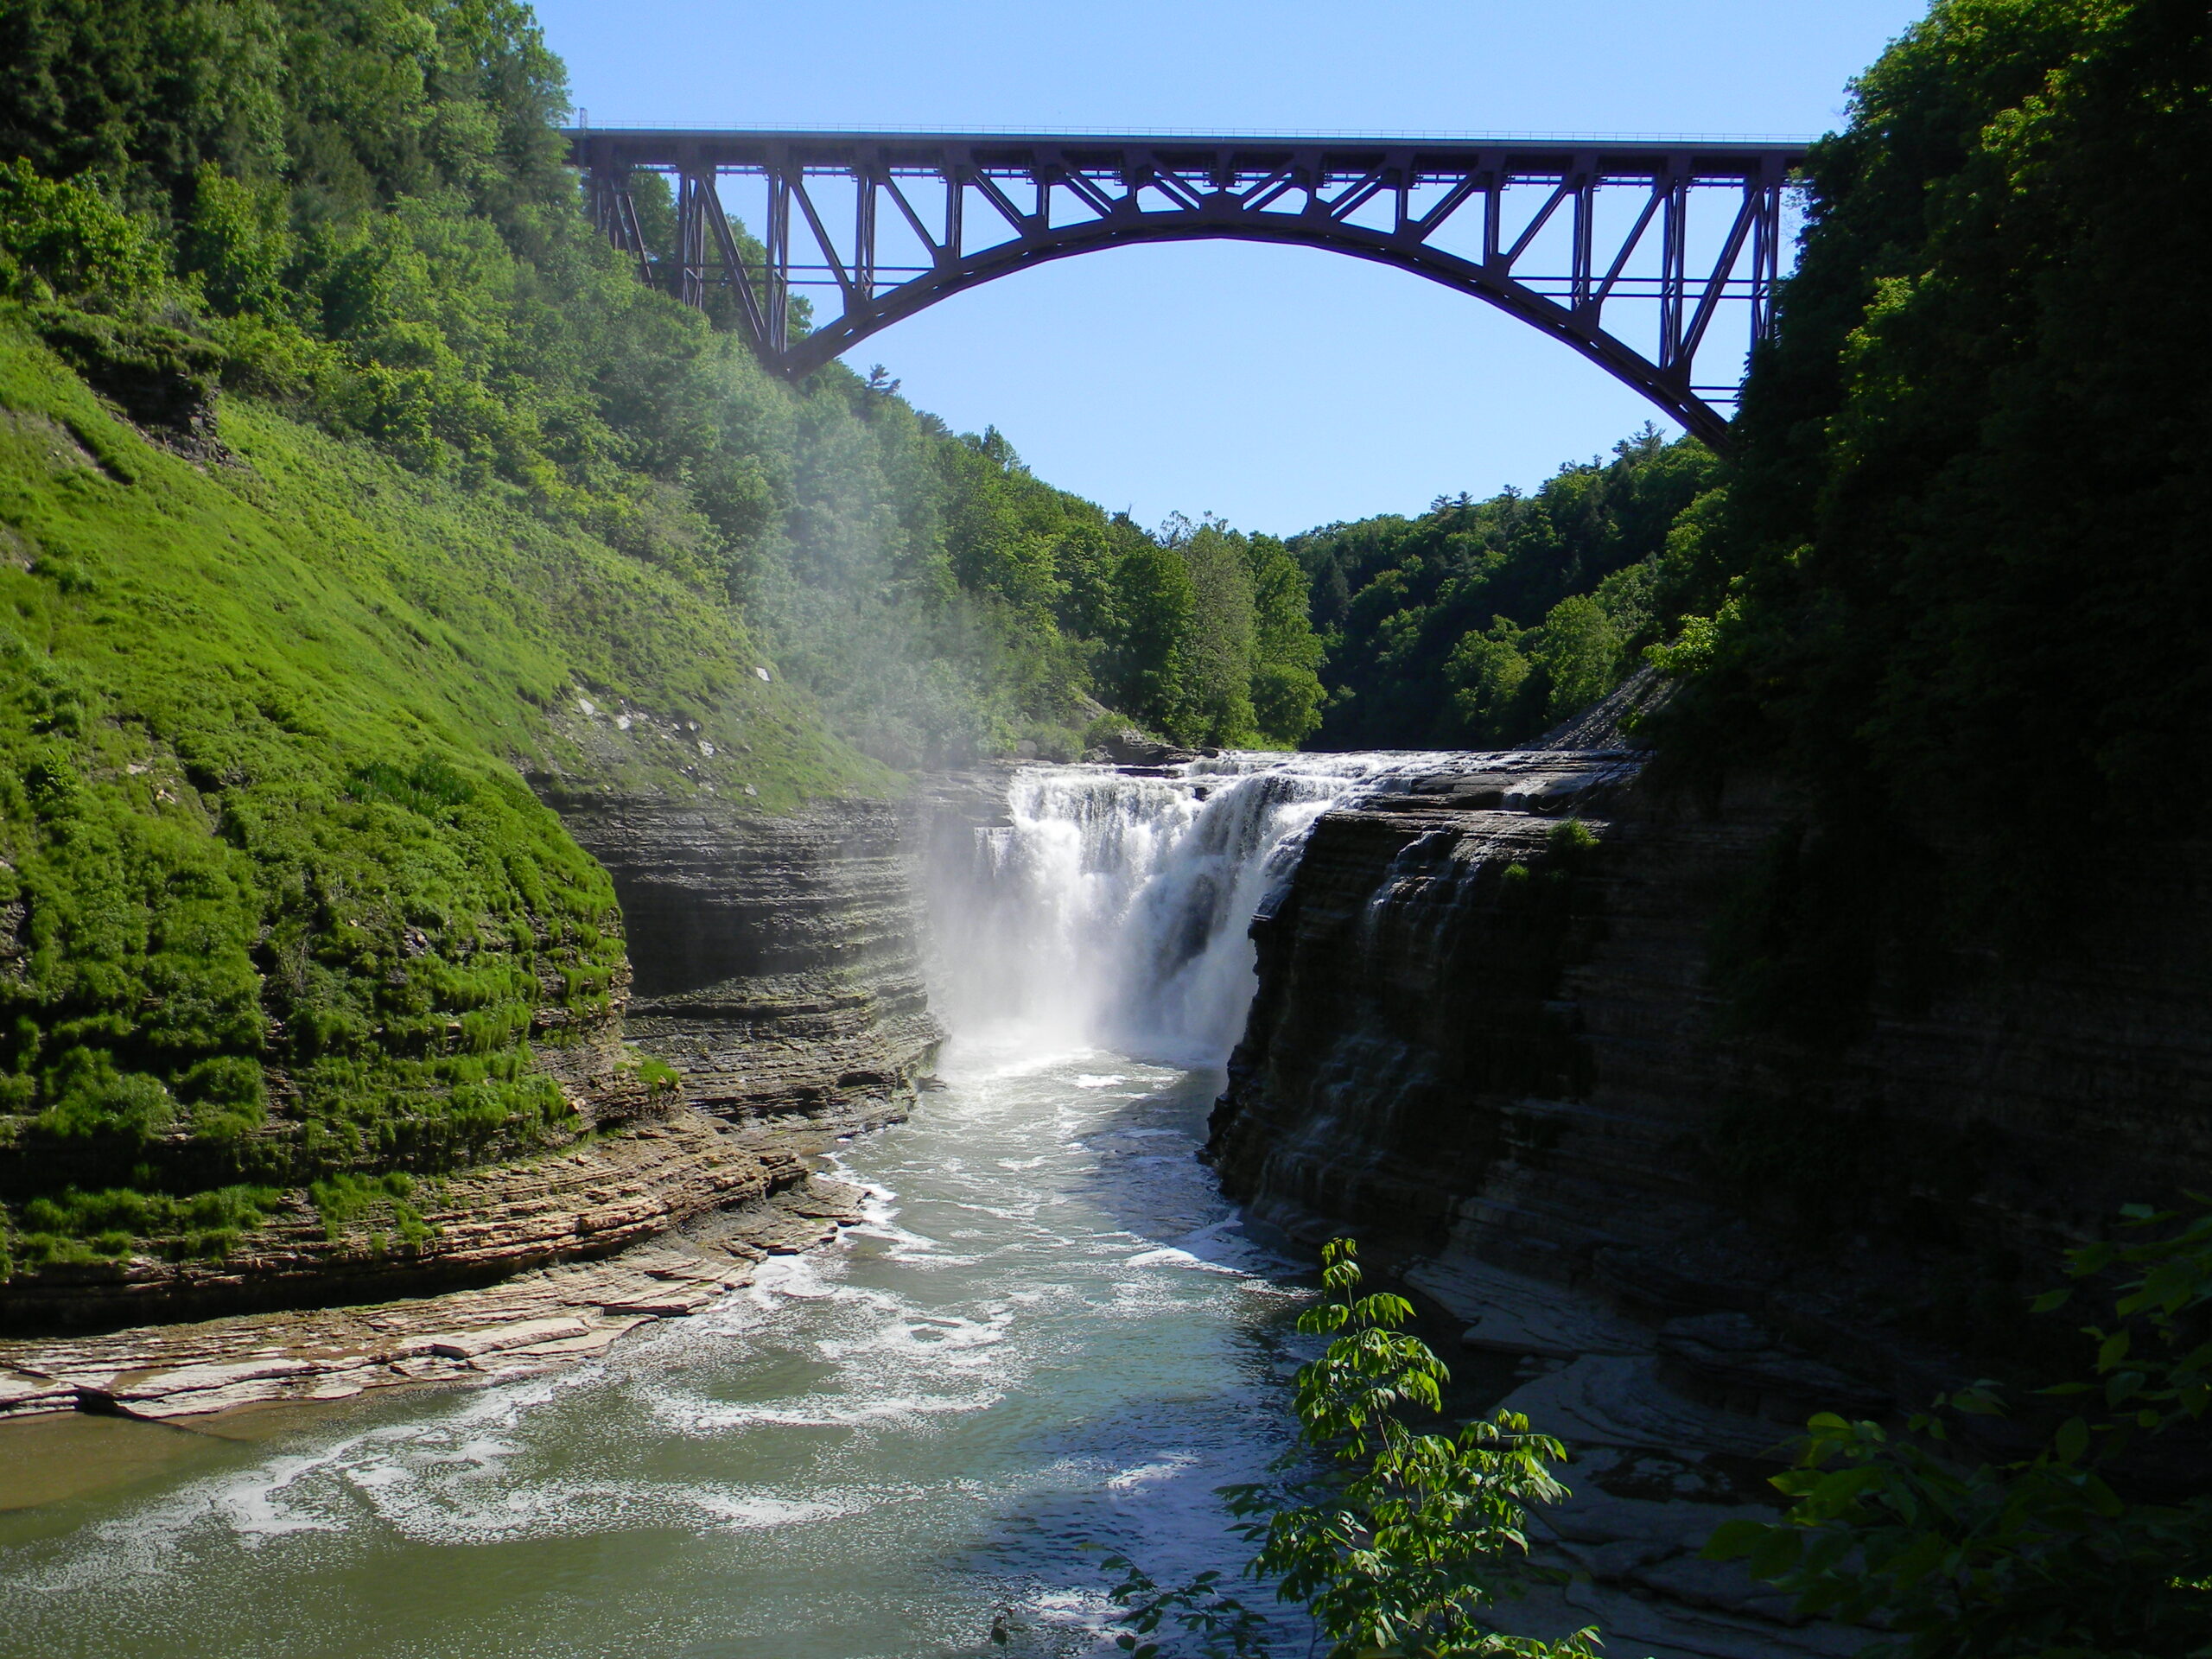 The Viaduct at Letchworth State Park